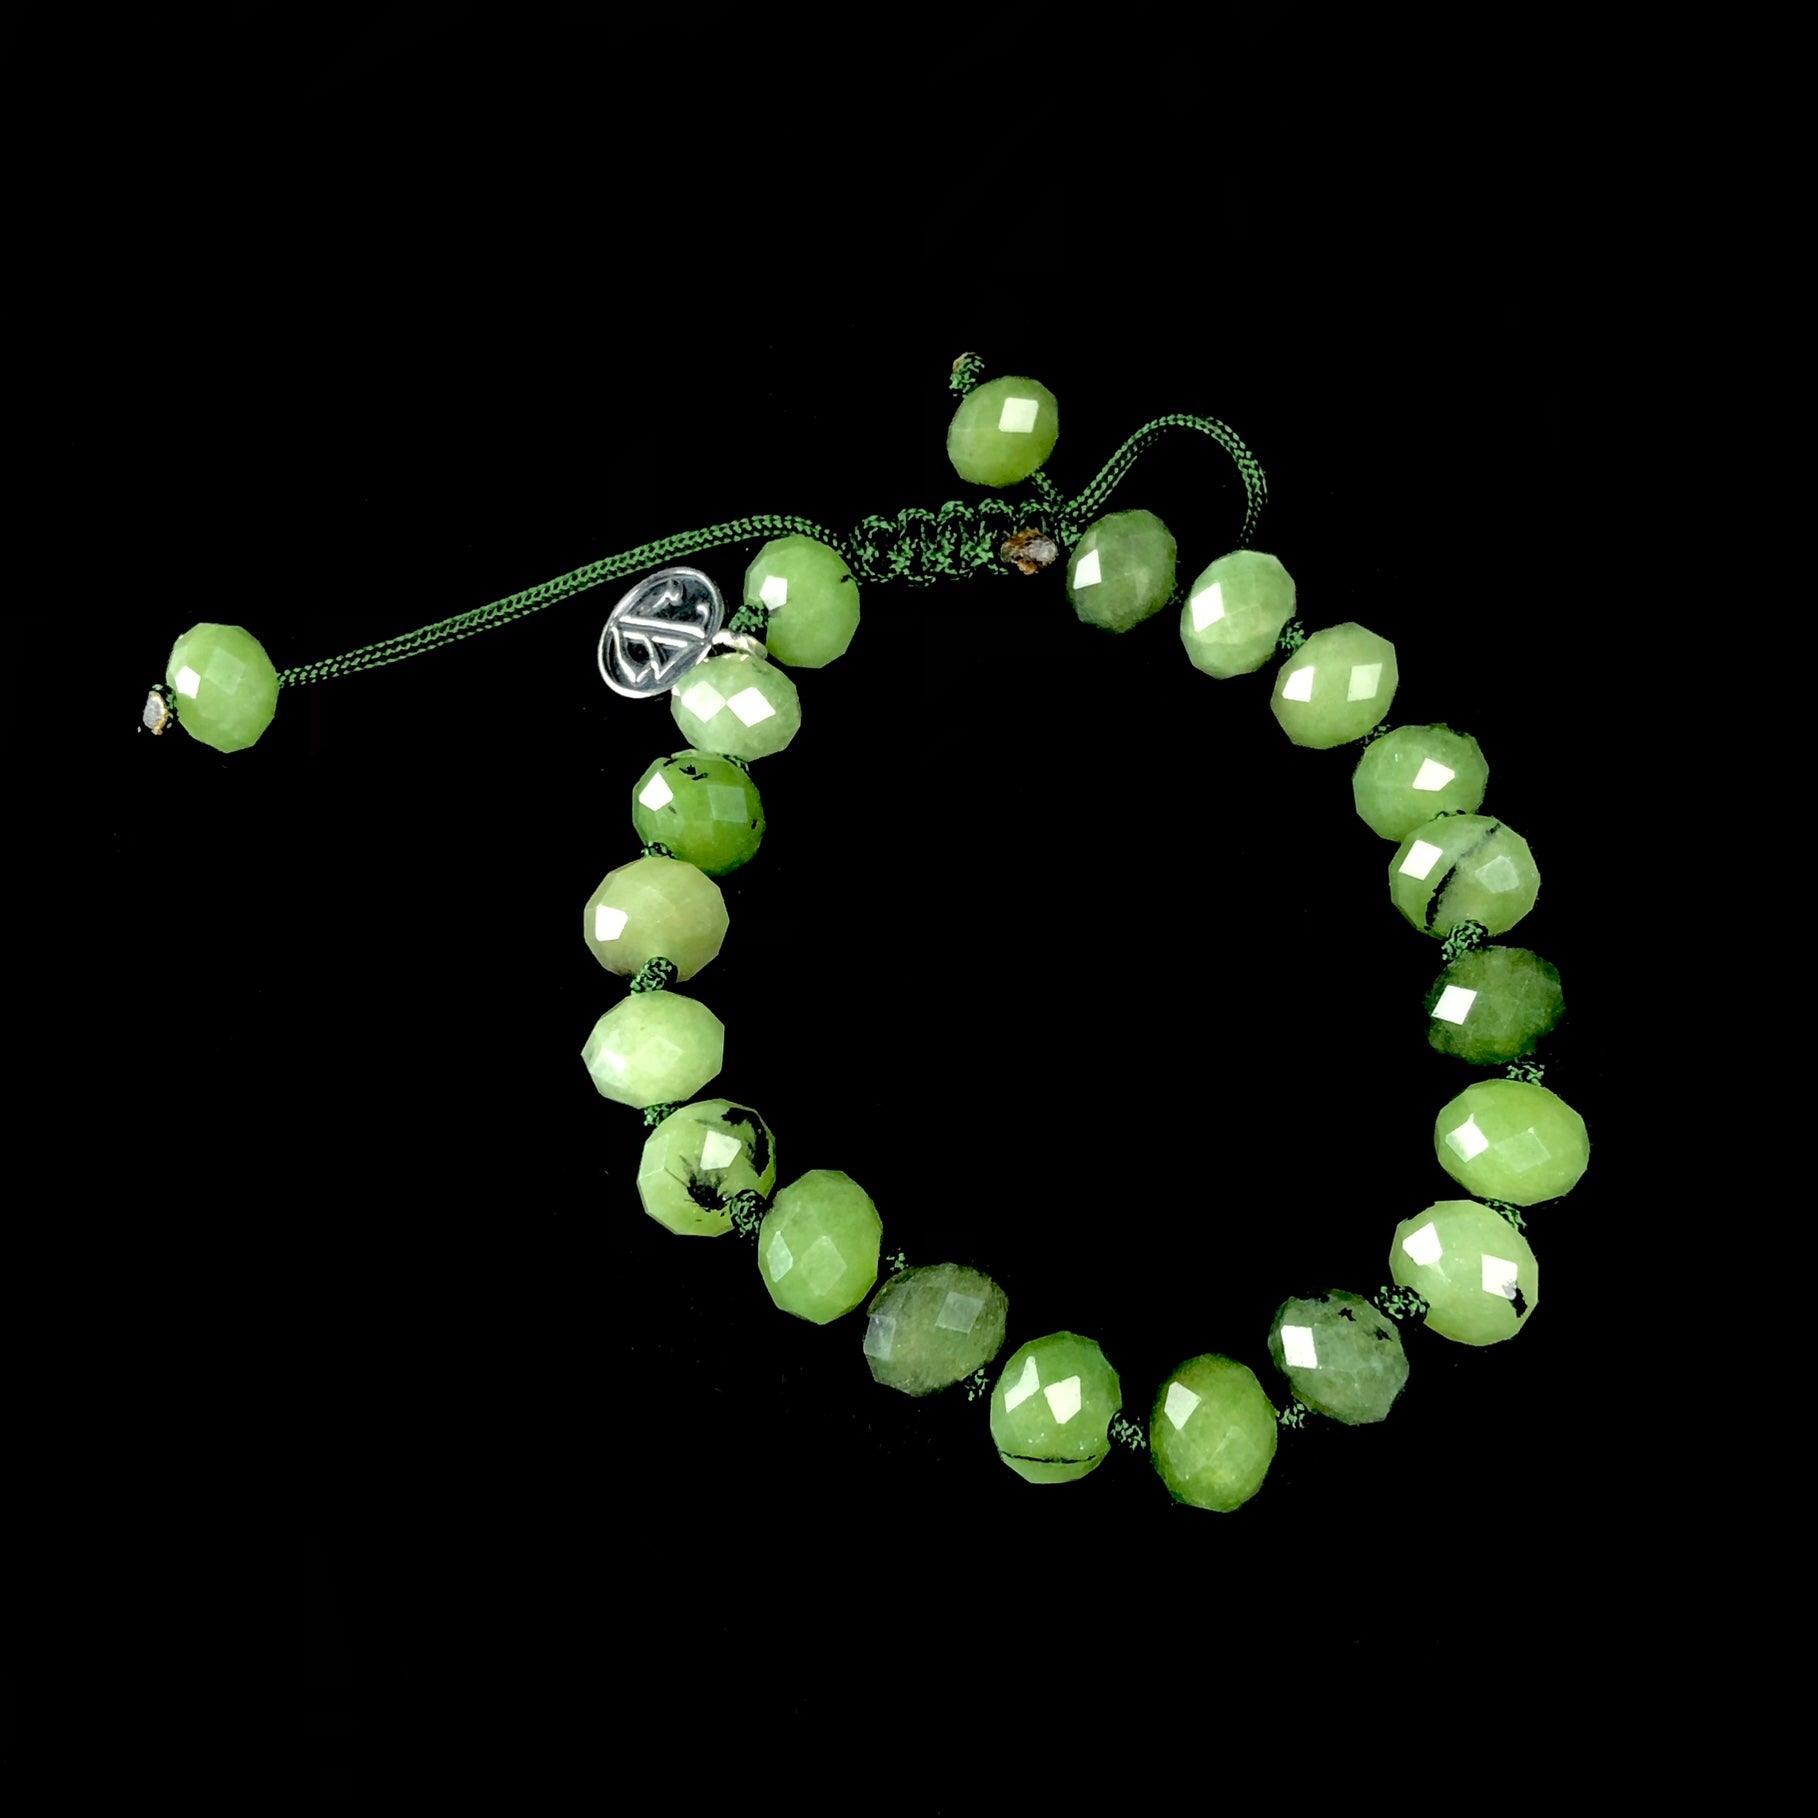 Opaque forest green colored bead bracelet knotted with dark green cord.